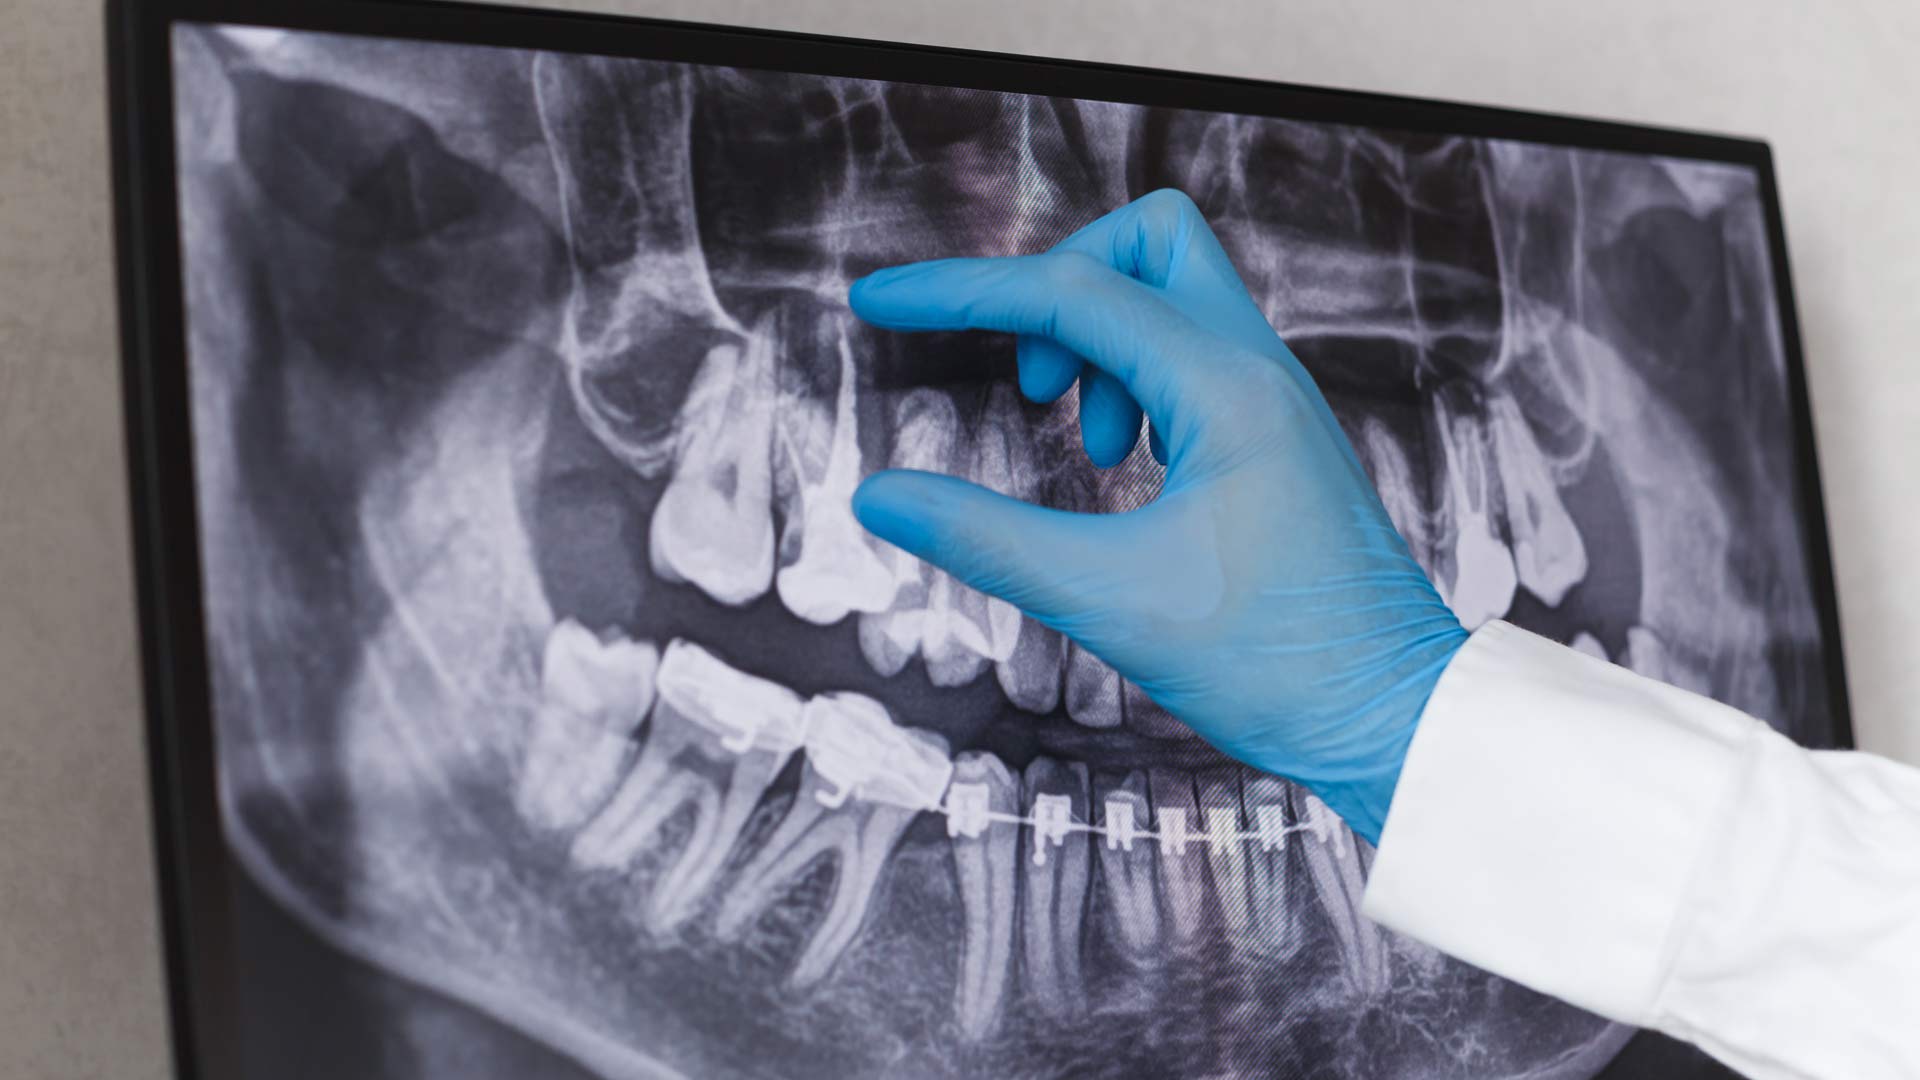 xray imaging before root canal treatment